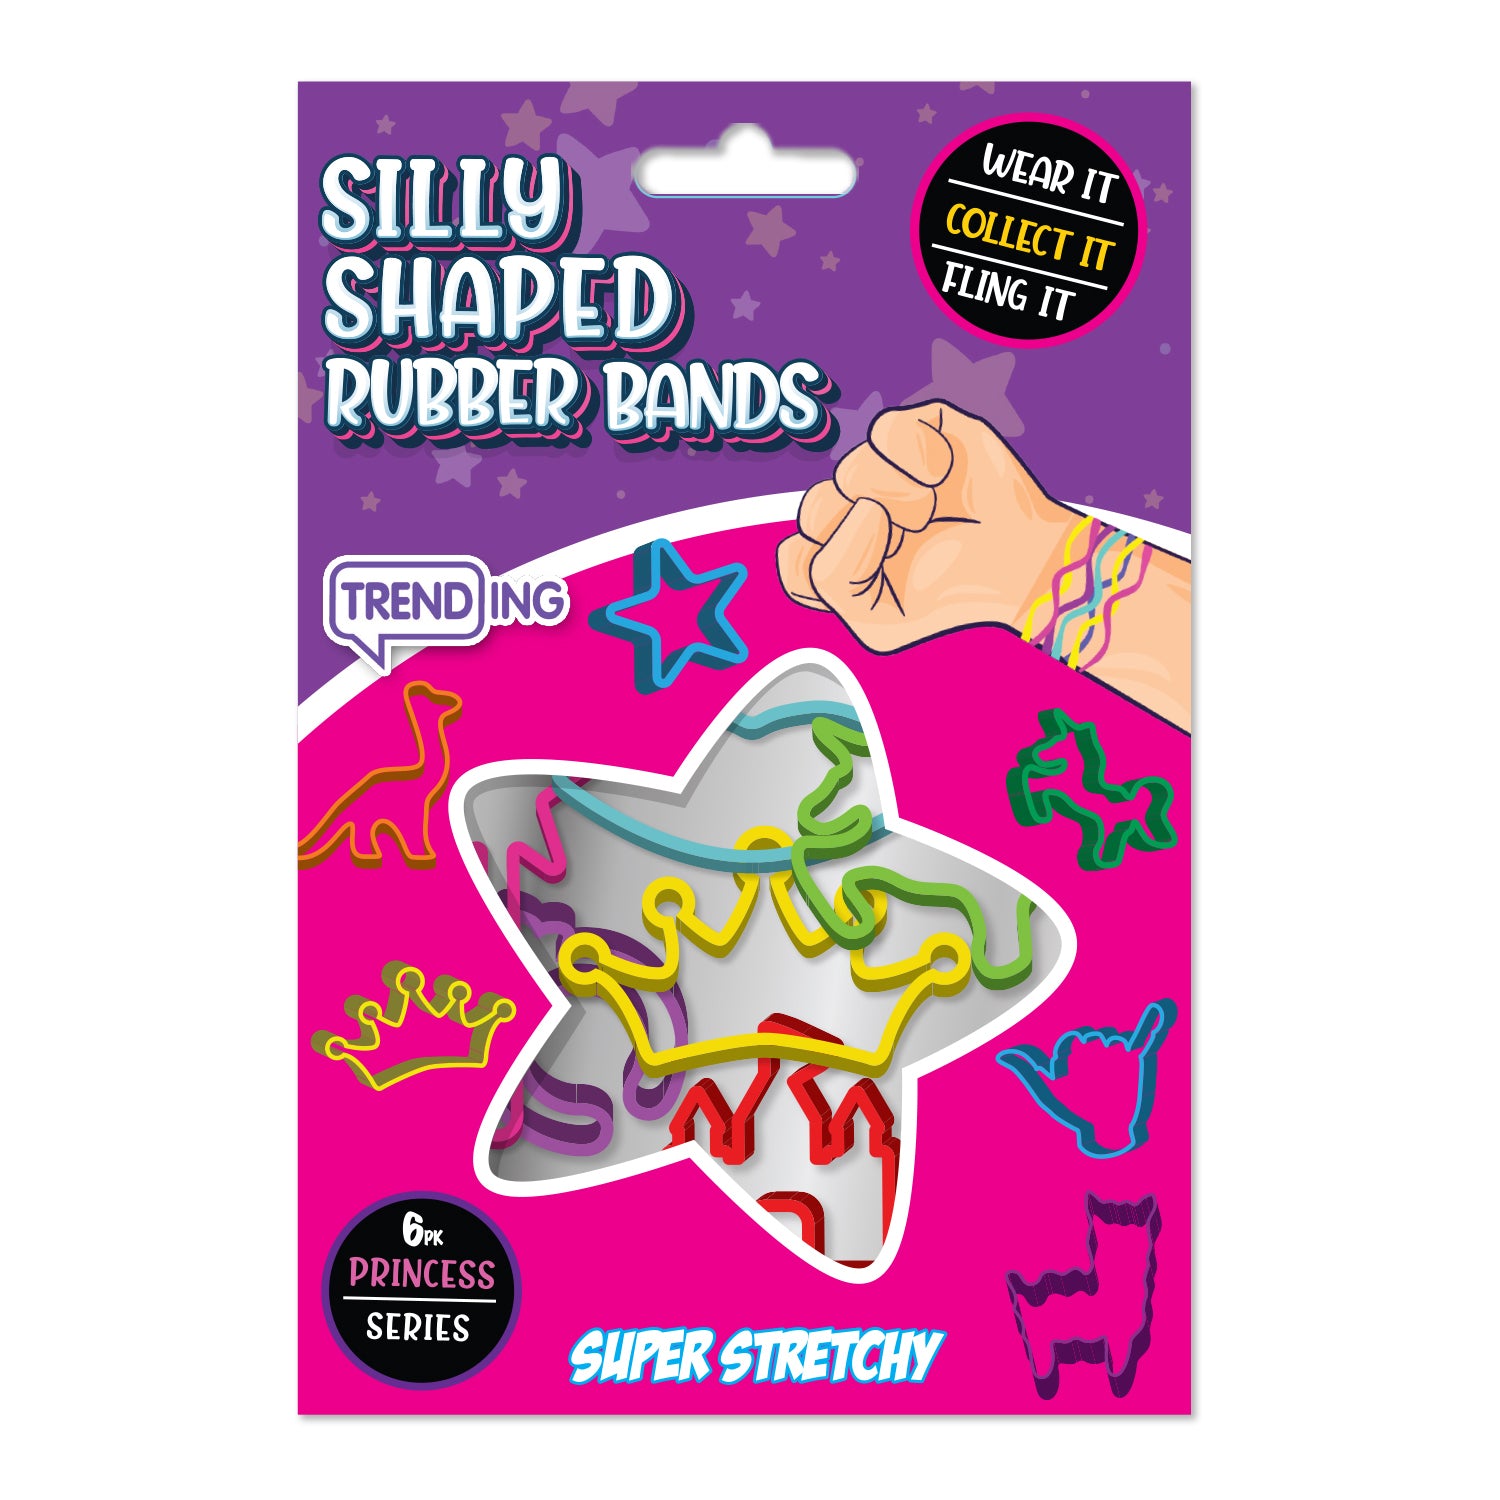 Super stretchy Silly Shaped Rubber Bands are fun wrist bands and fidget toys you can stretch, shoot and sling. Collect, create games and wear anywhere. 